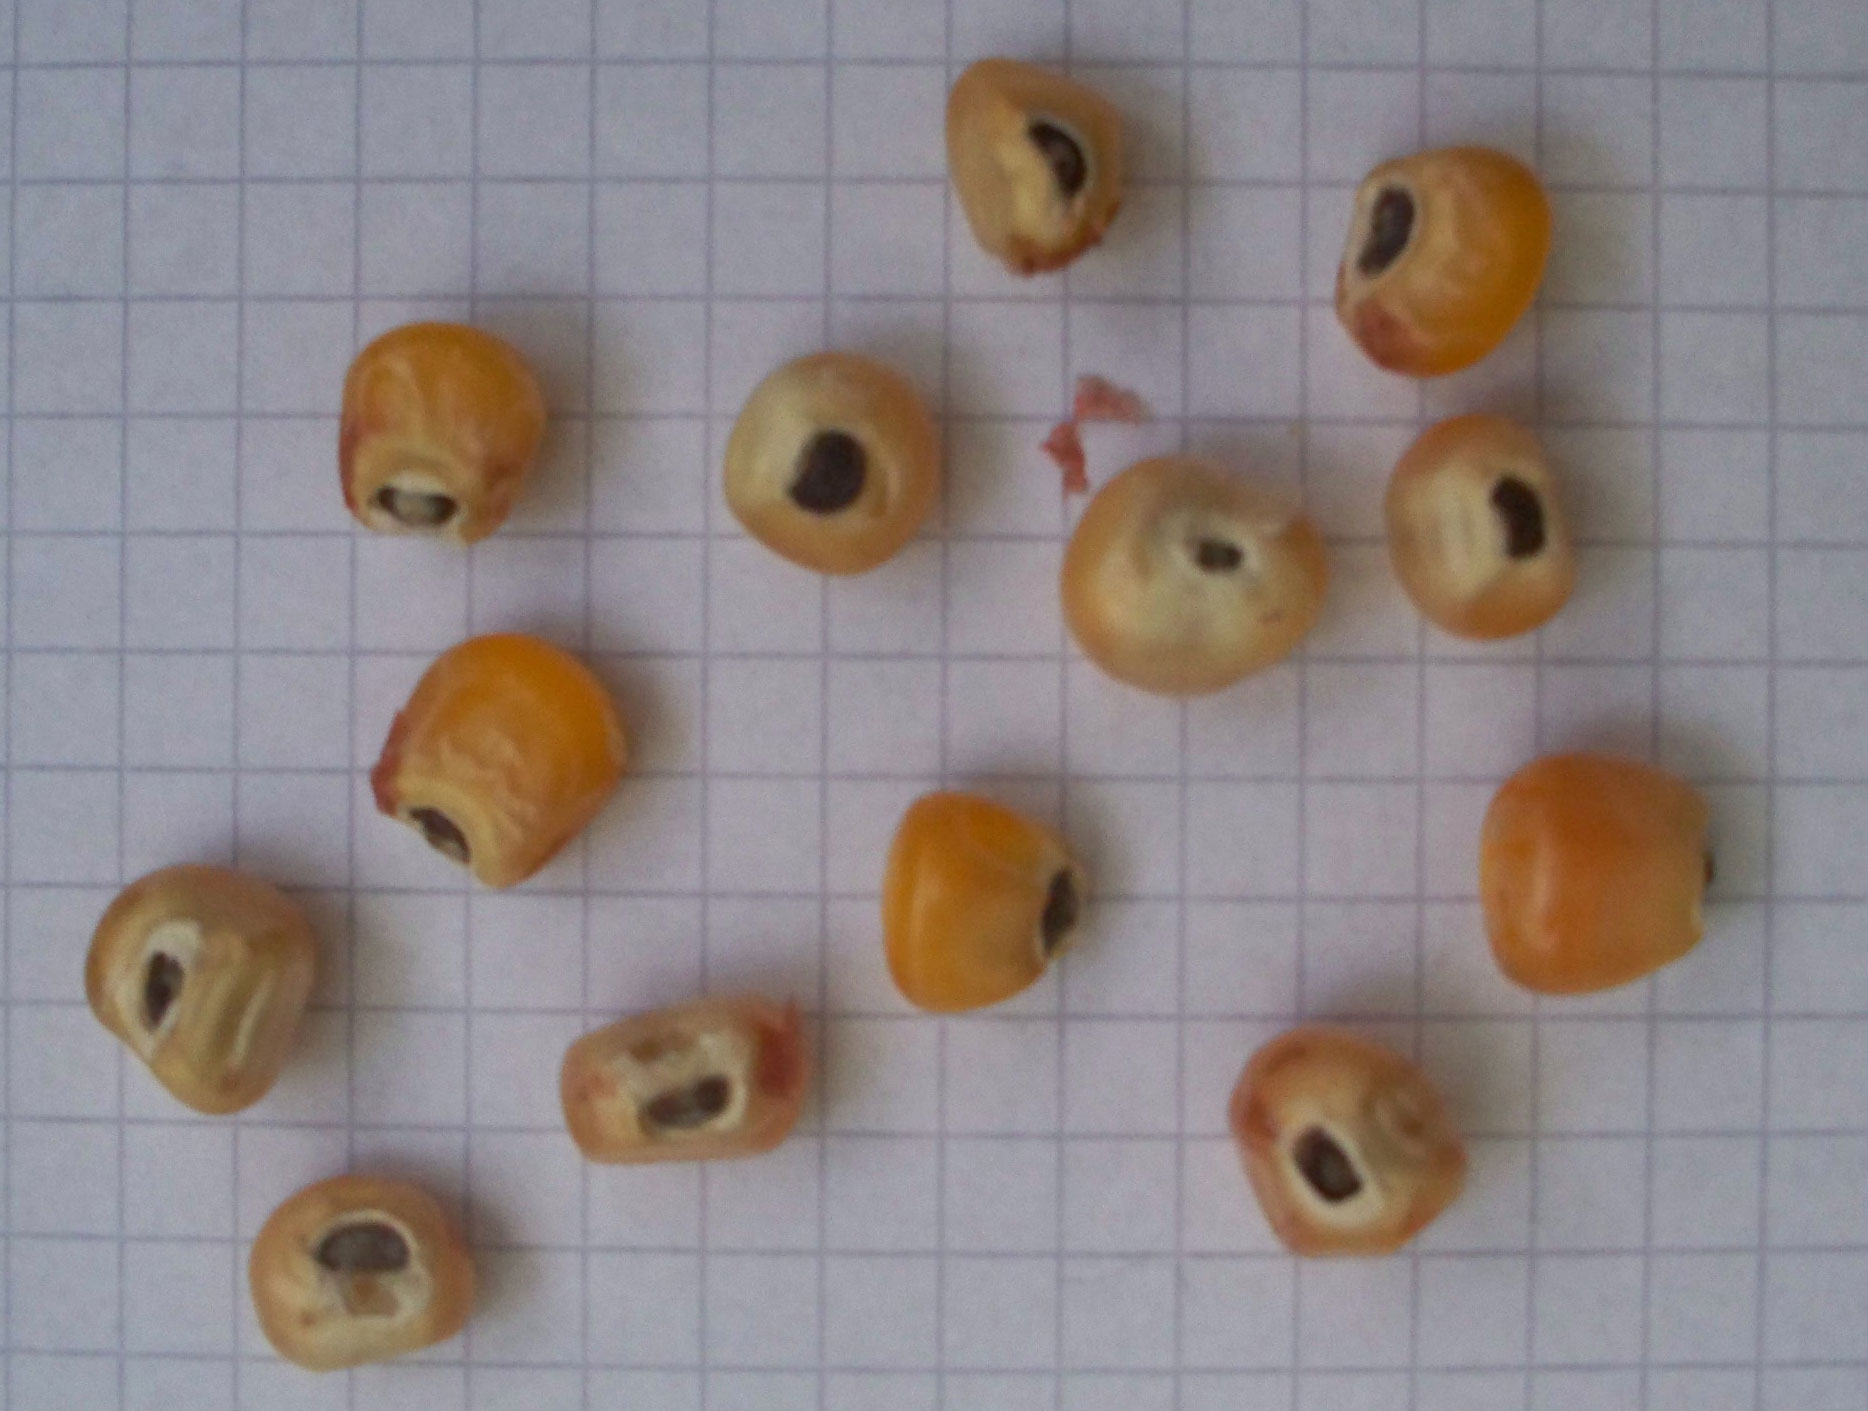 Photograph of physiologically mature maize kernels sitting an a piece of graph paper. The photo shows dark yellow kernels, each with a black spot at its base.